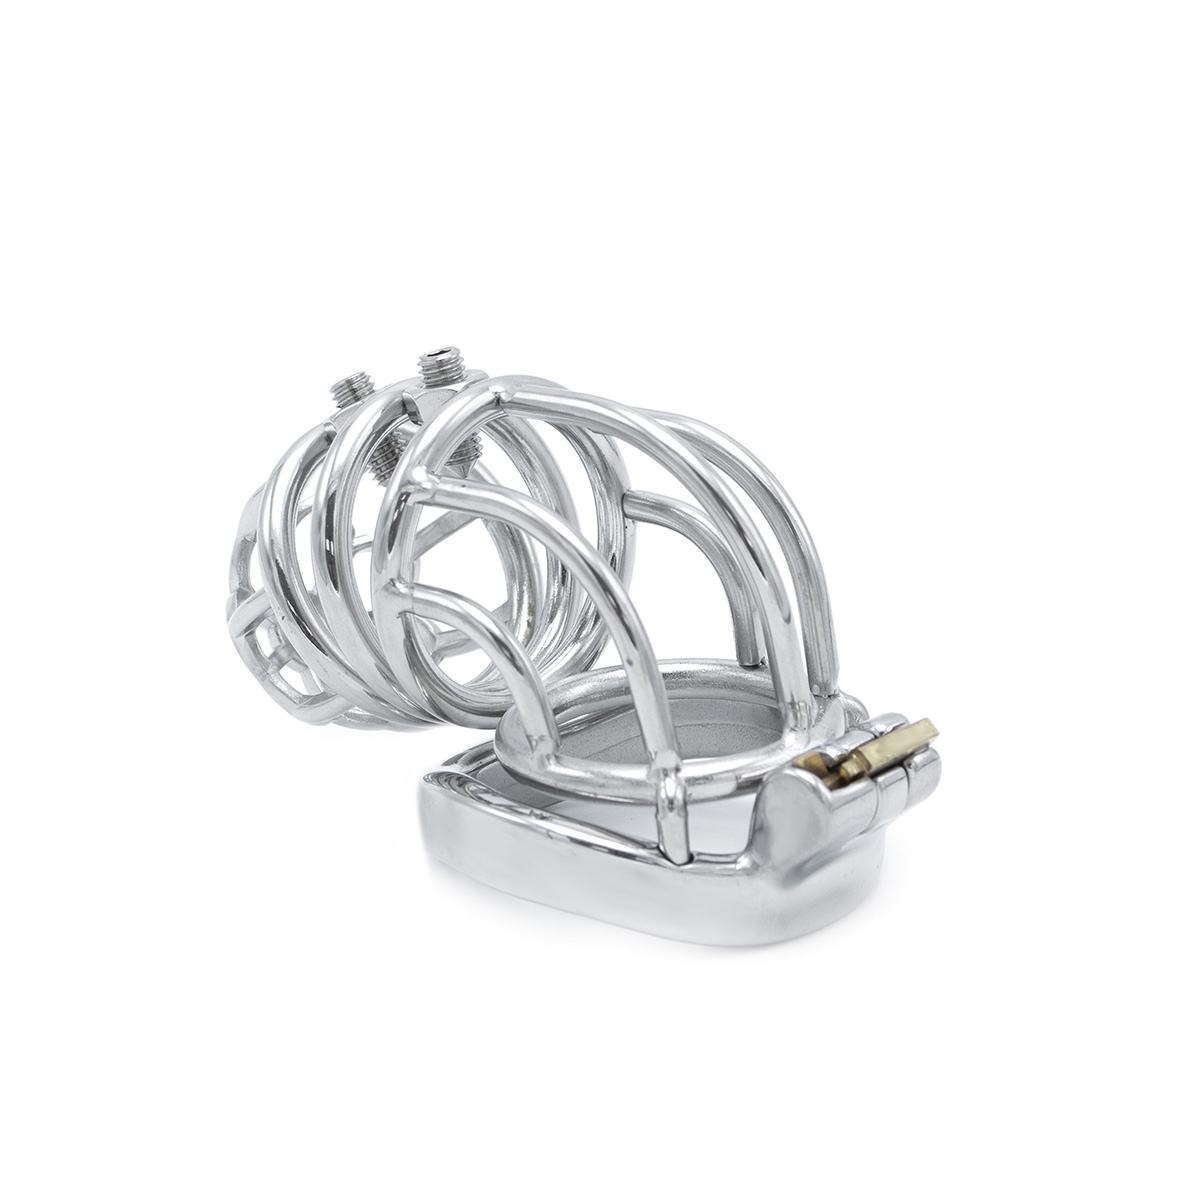 Cruve-Torture-Chastity-Device-OPR-278008-4